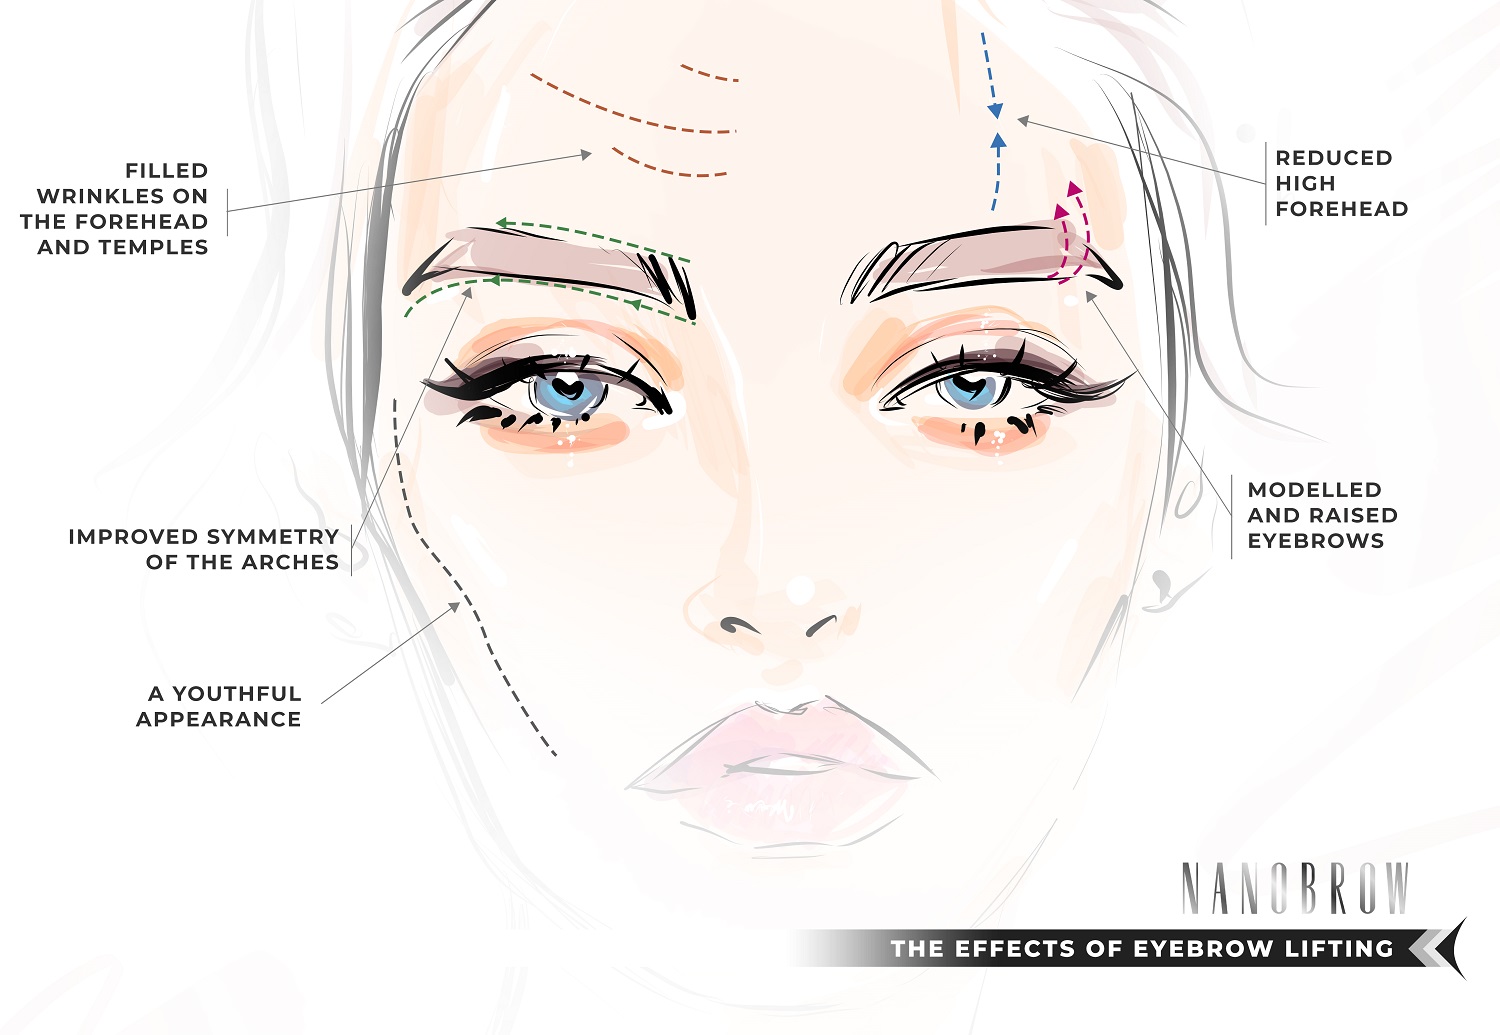 What causes brow lift?